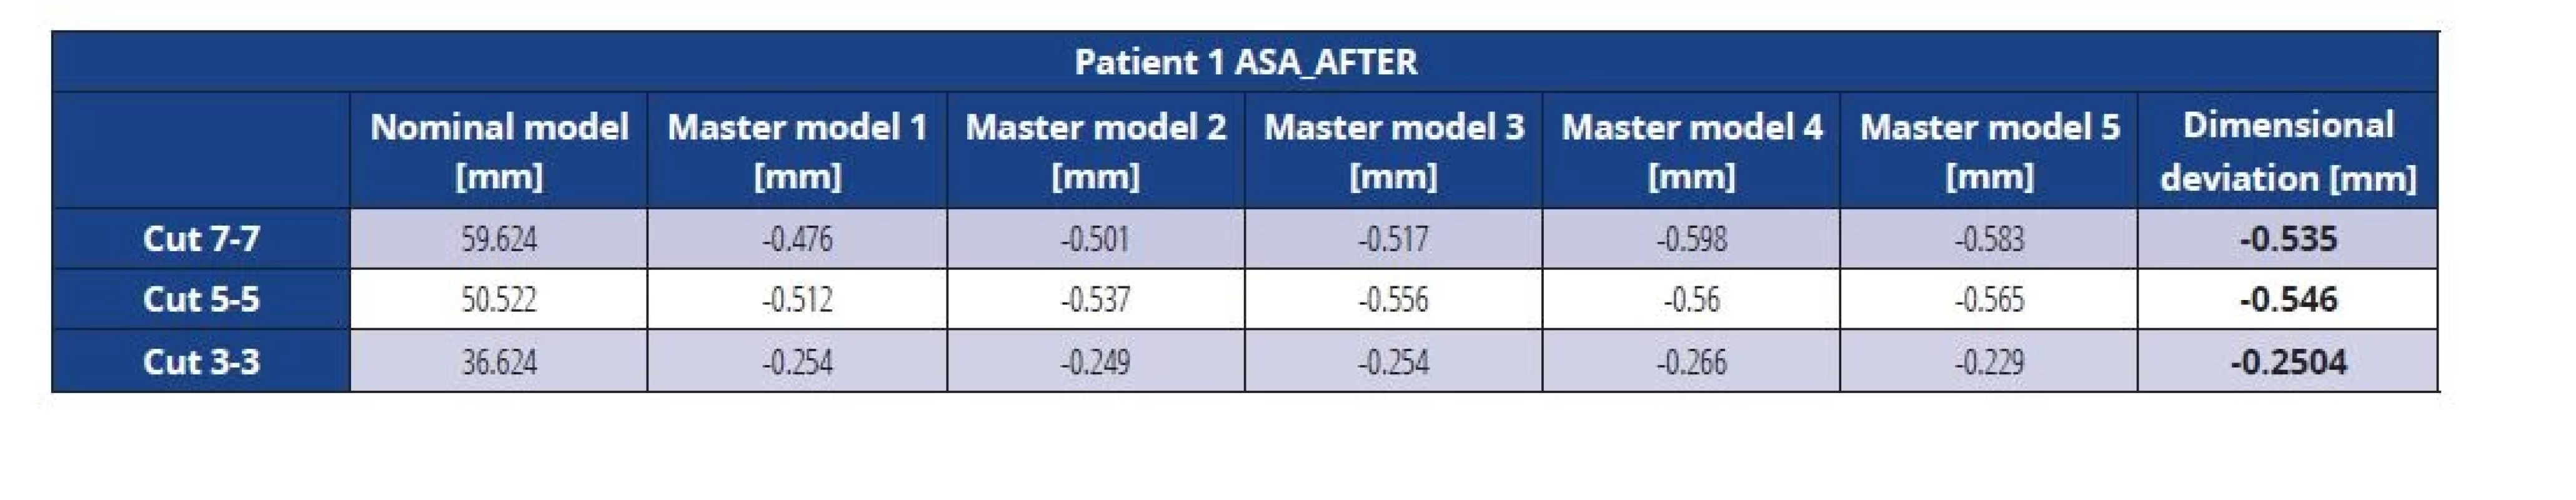 Dimensional deviations of the ASA master model after vacuuming (patient 1)
